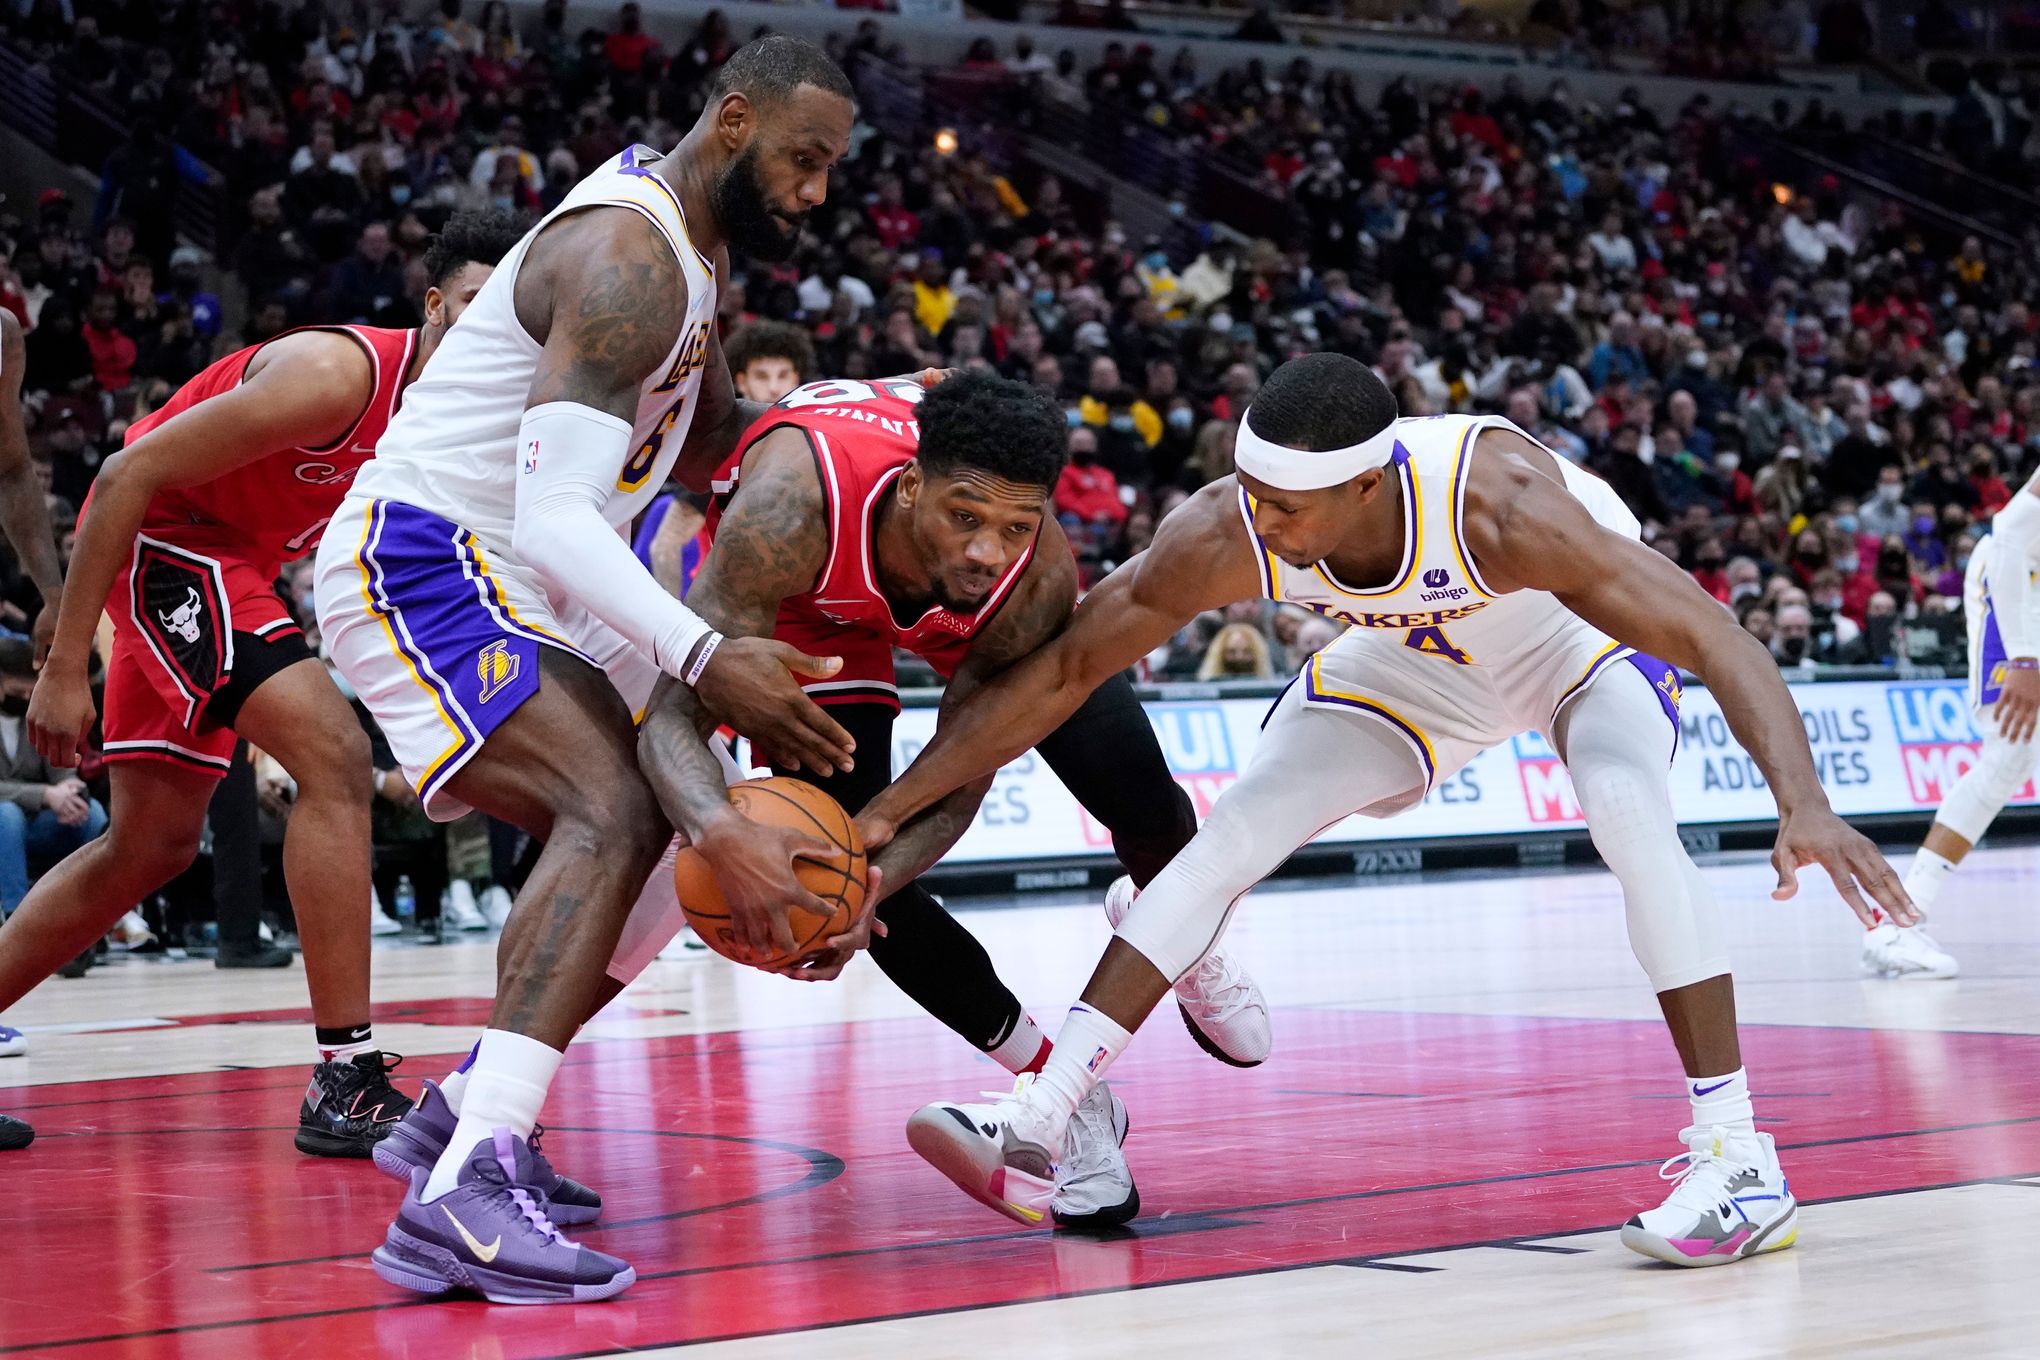 DeRozan, Bulls bounce back with win over Lakers